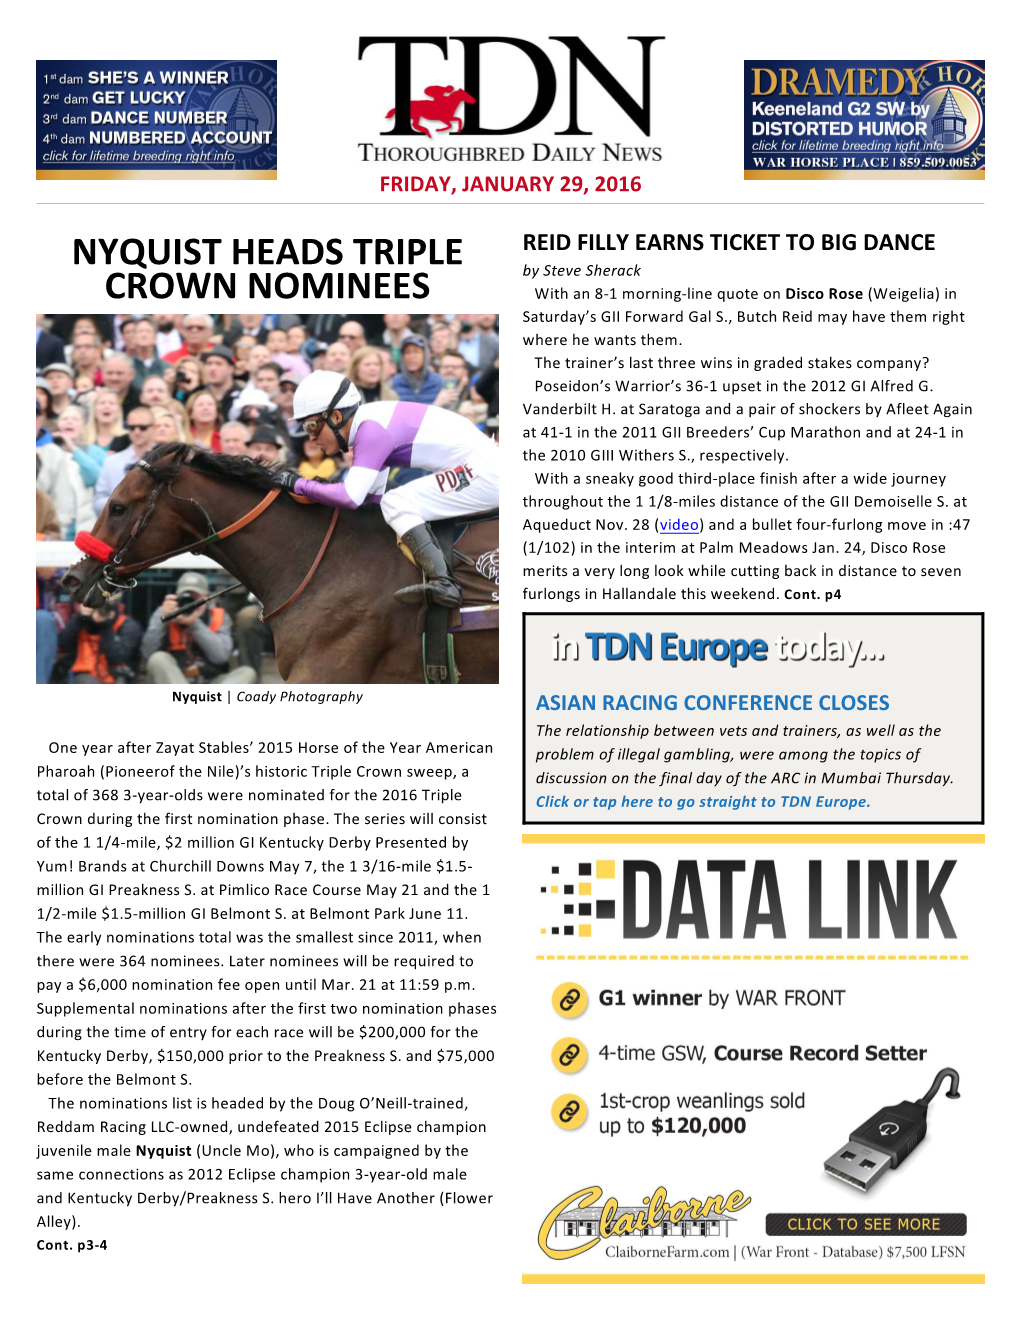 Nyquist Heads Triple Crown Nominees Cont